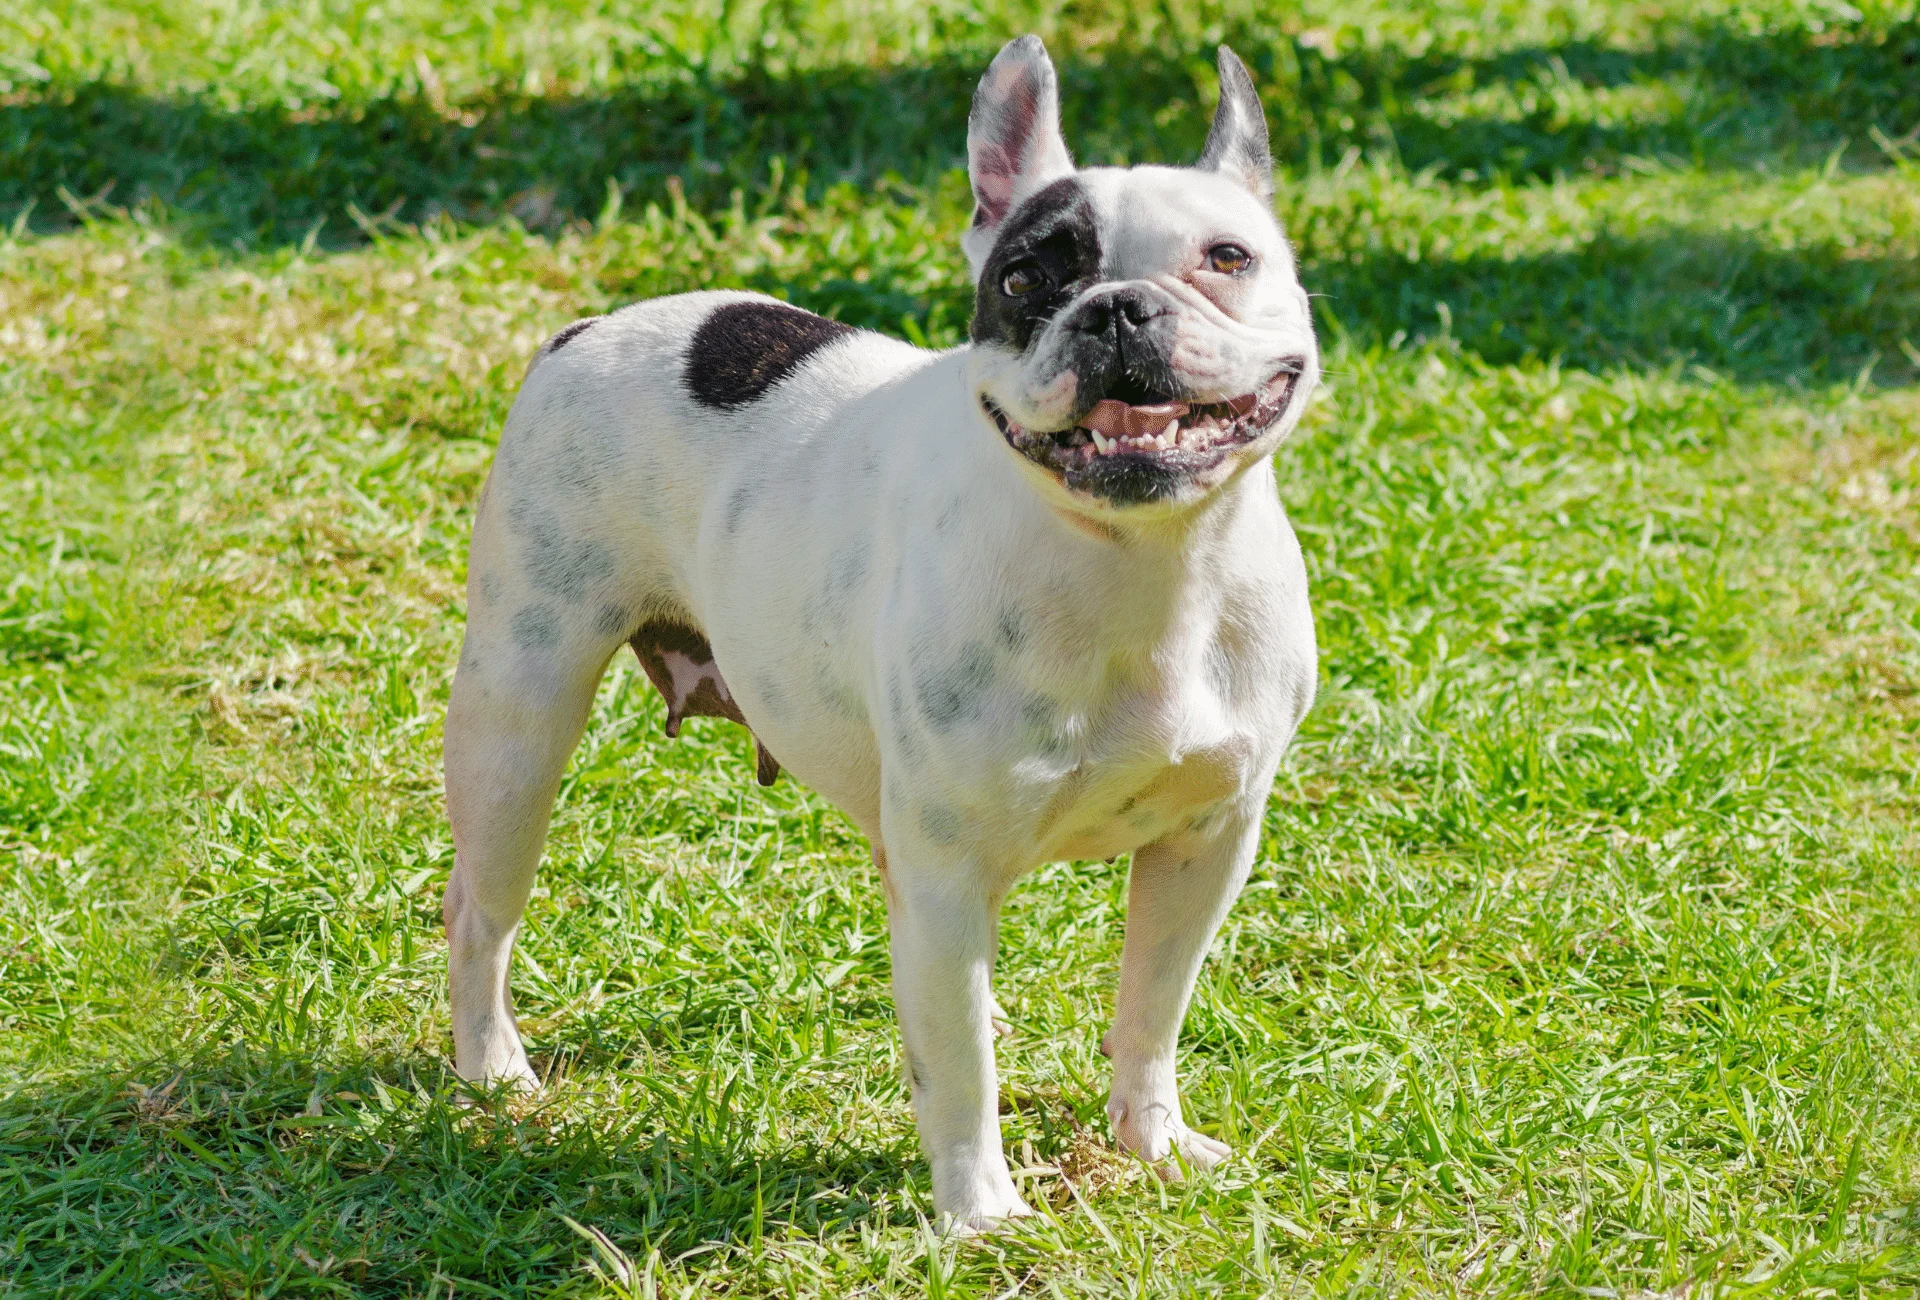 White Boston Terrier splashed with a black spot on the back and around the eye, as well as nearly invisible splotches covering the body.